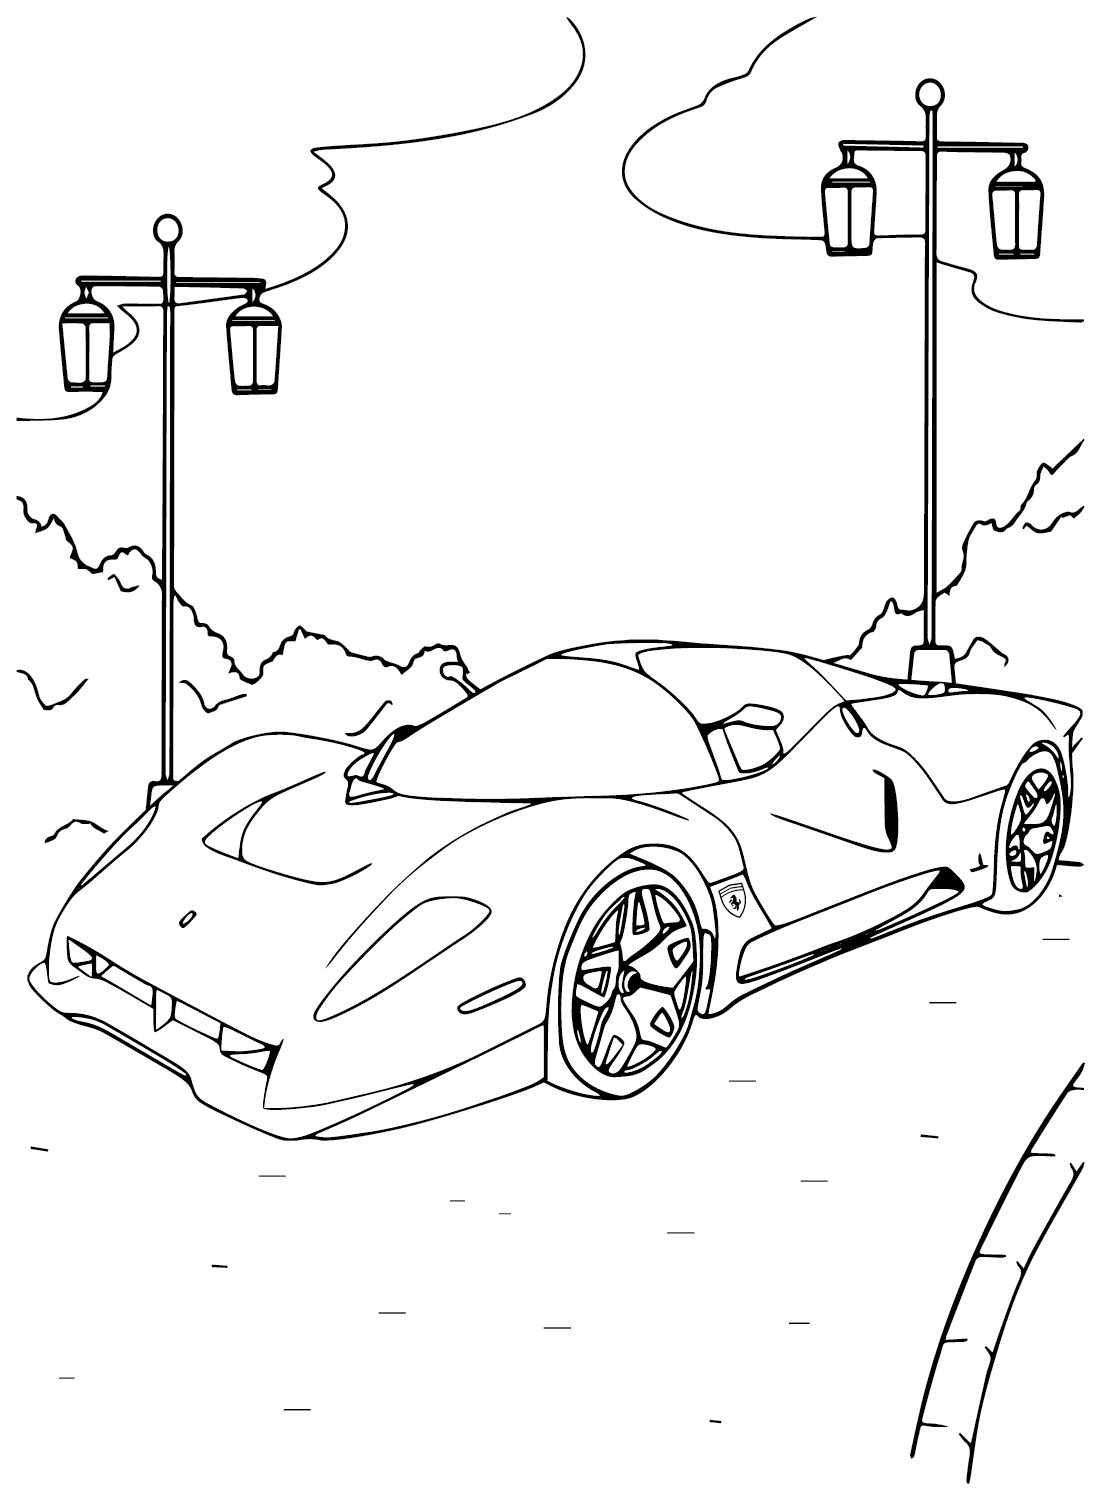 Ferrari Images to Color - Free Printable Coloring Pages